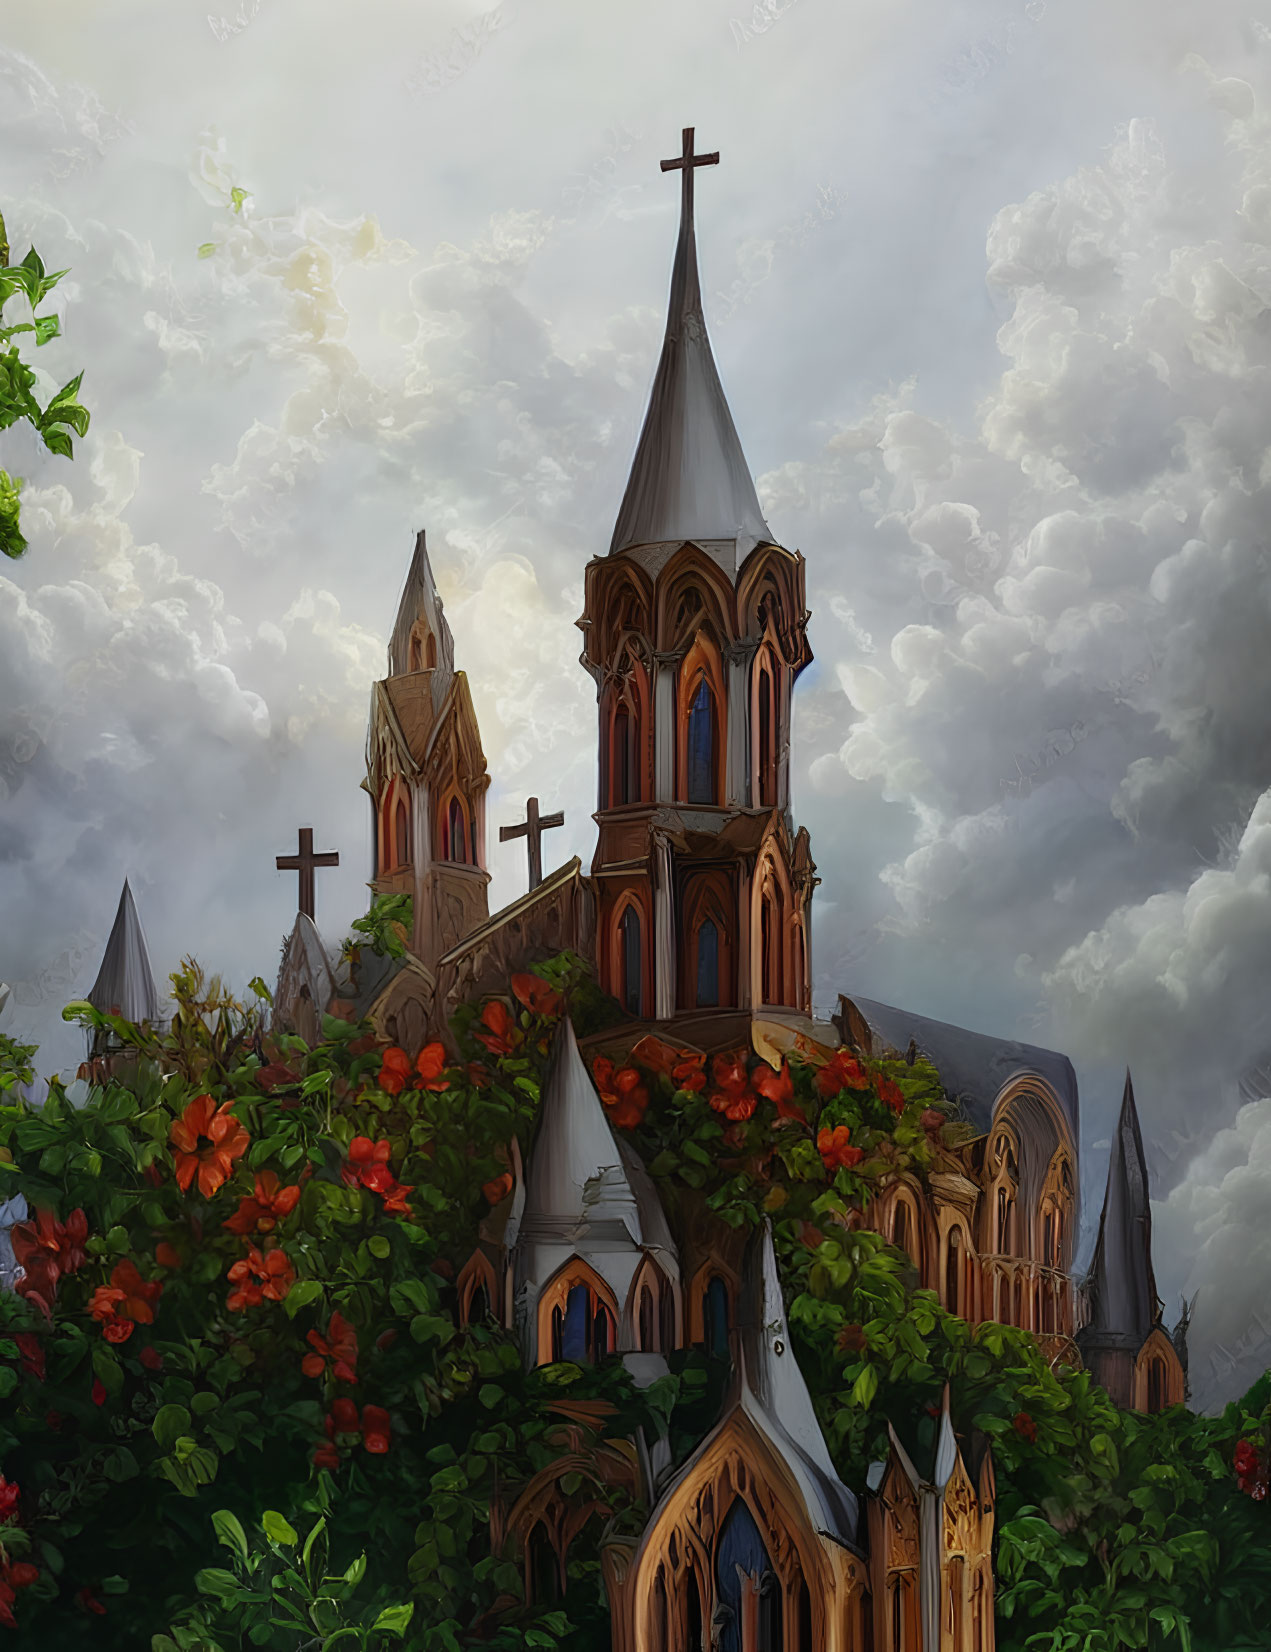 Gothic church spires amid lush greenery and red flowers against dramatic sky